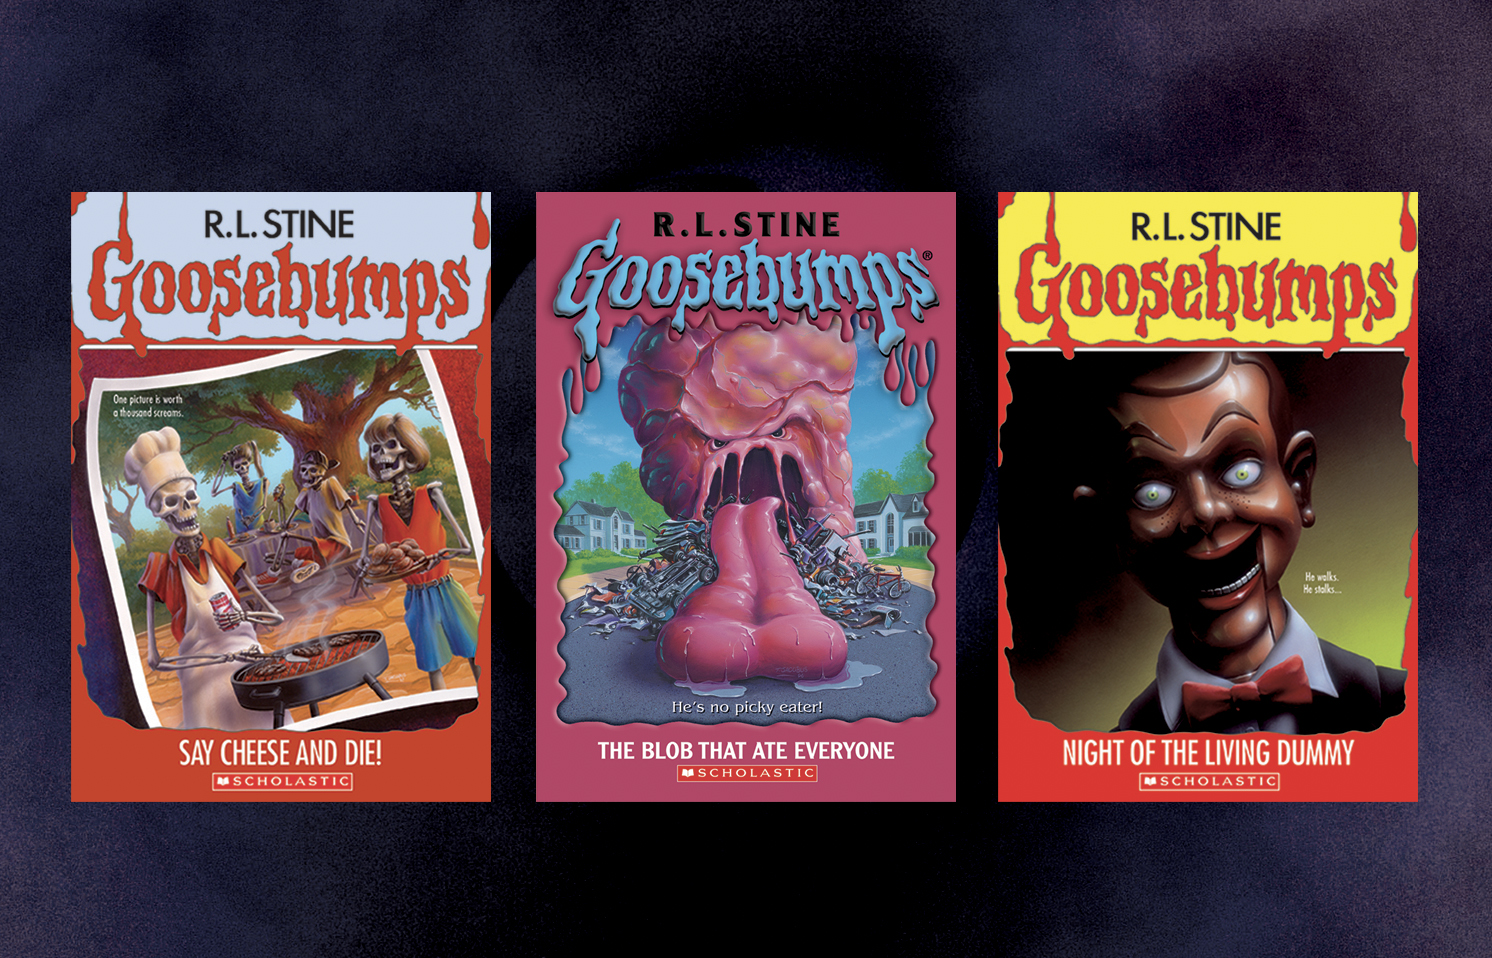 This July marks the 30th anniversary of R.L. Stine's 'Goosebumps' horror series for young readers.